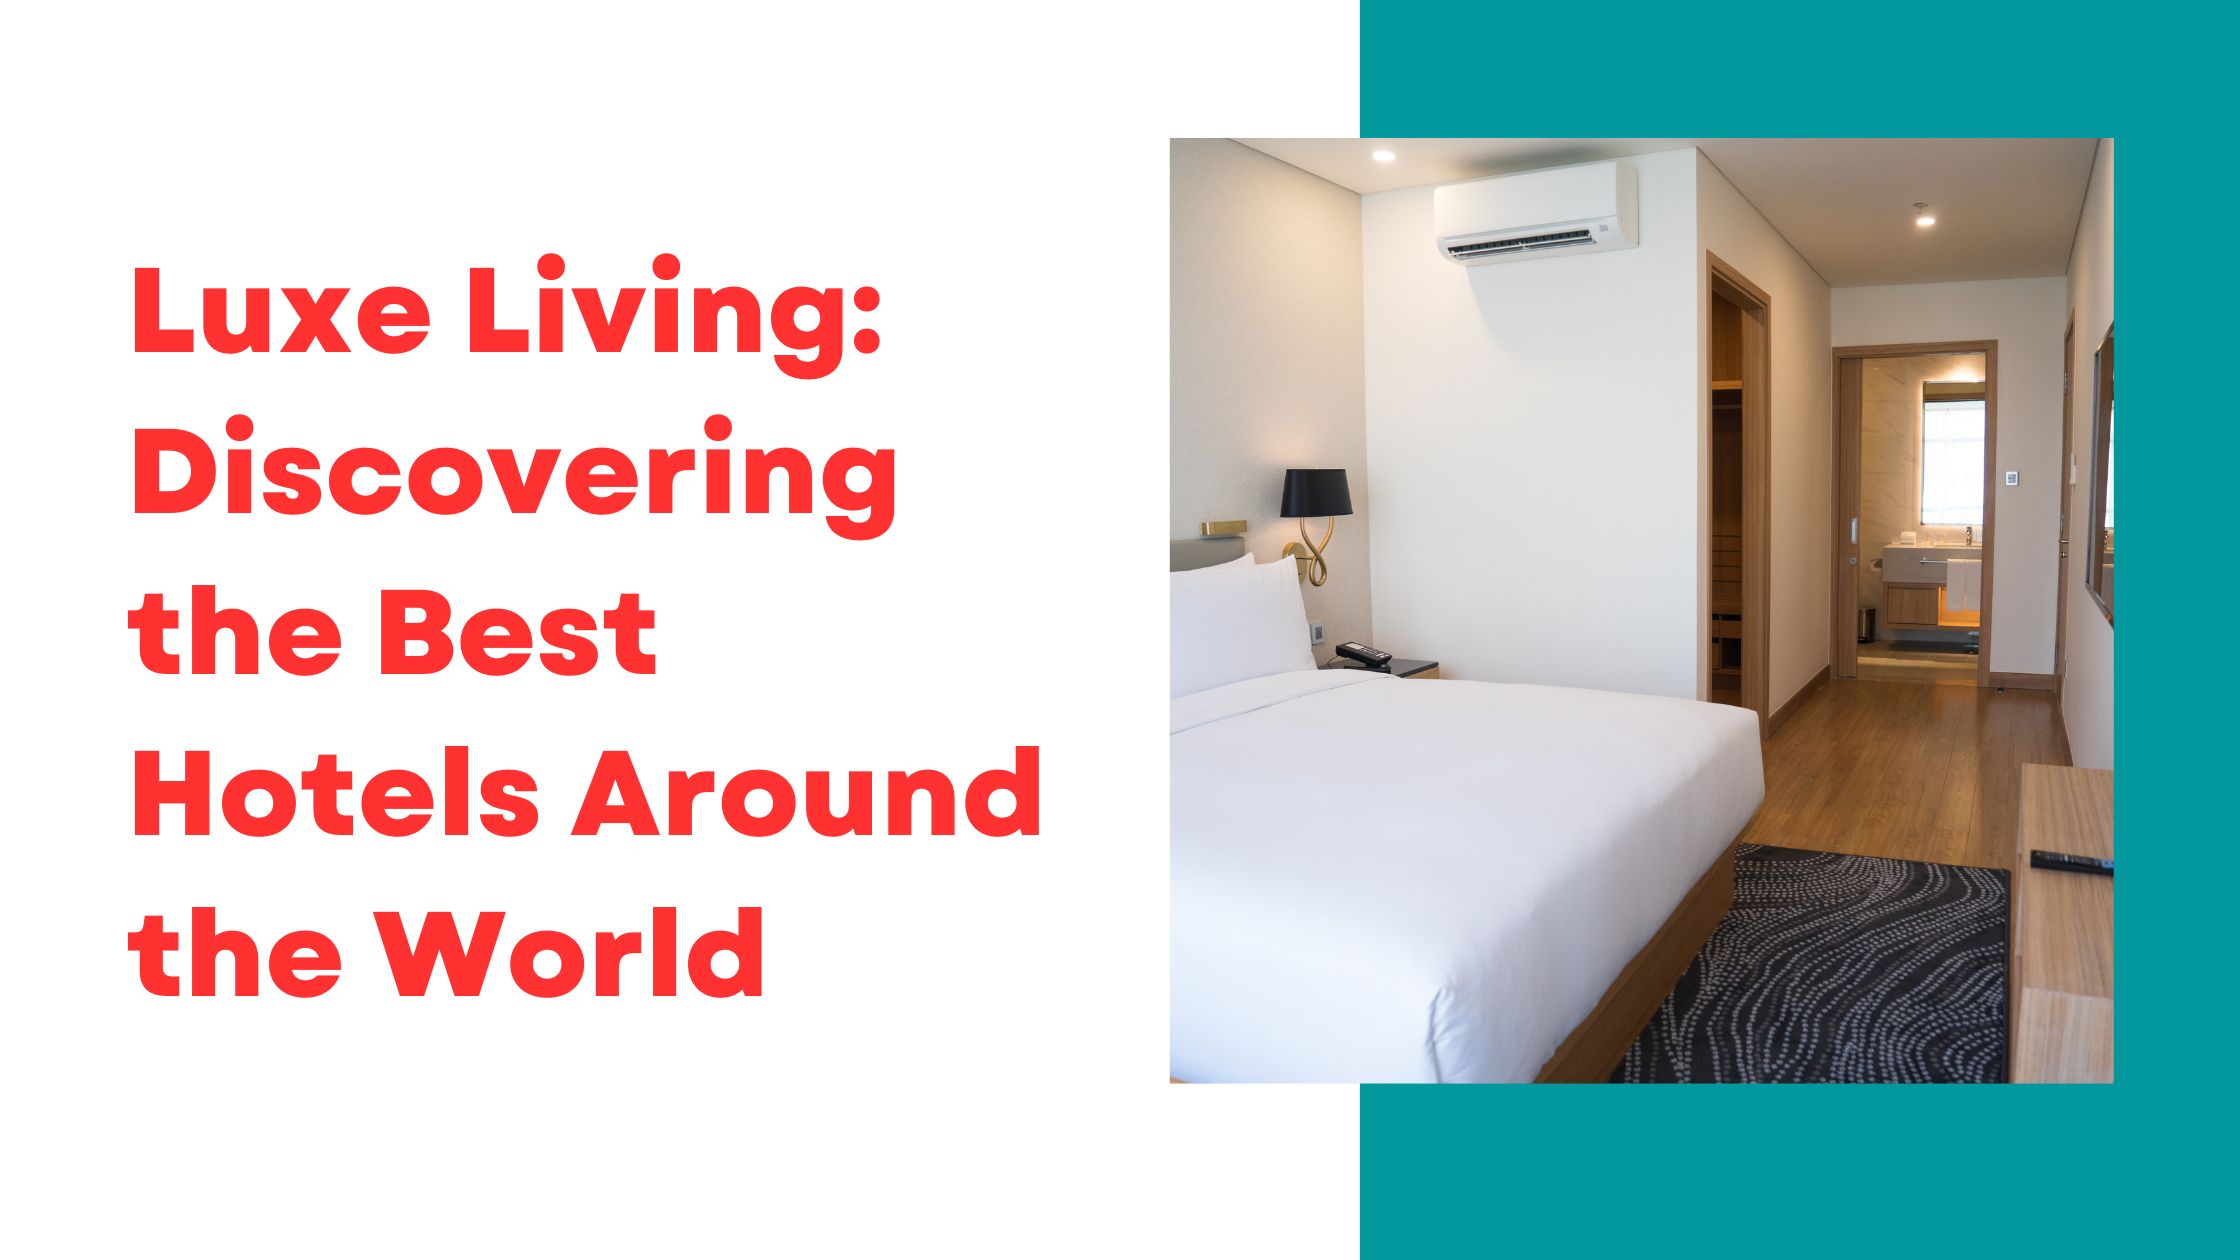 Luxe Living: Discovering the Best Hotels Around the World